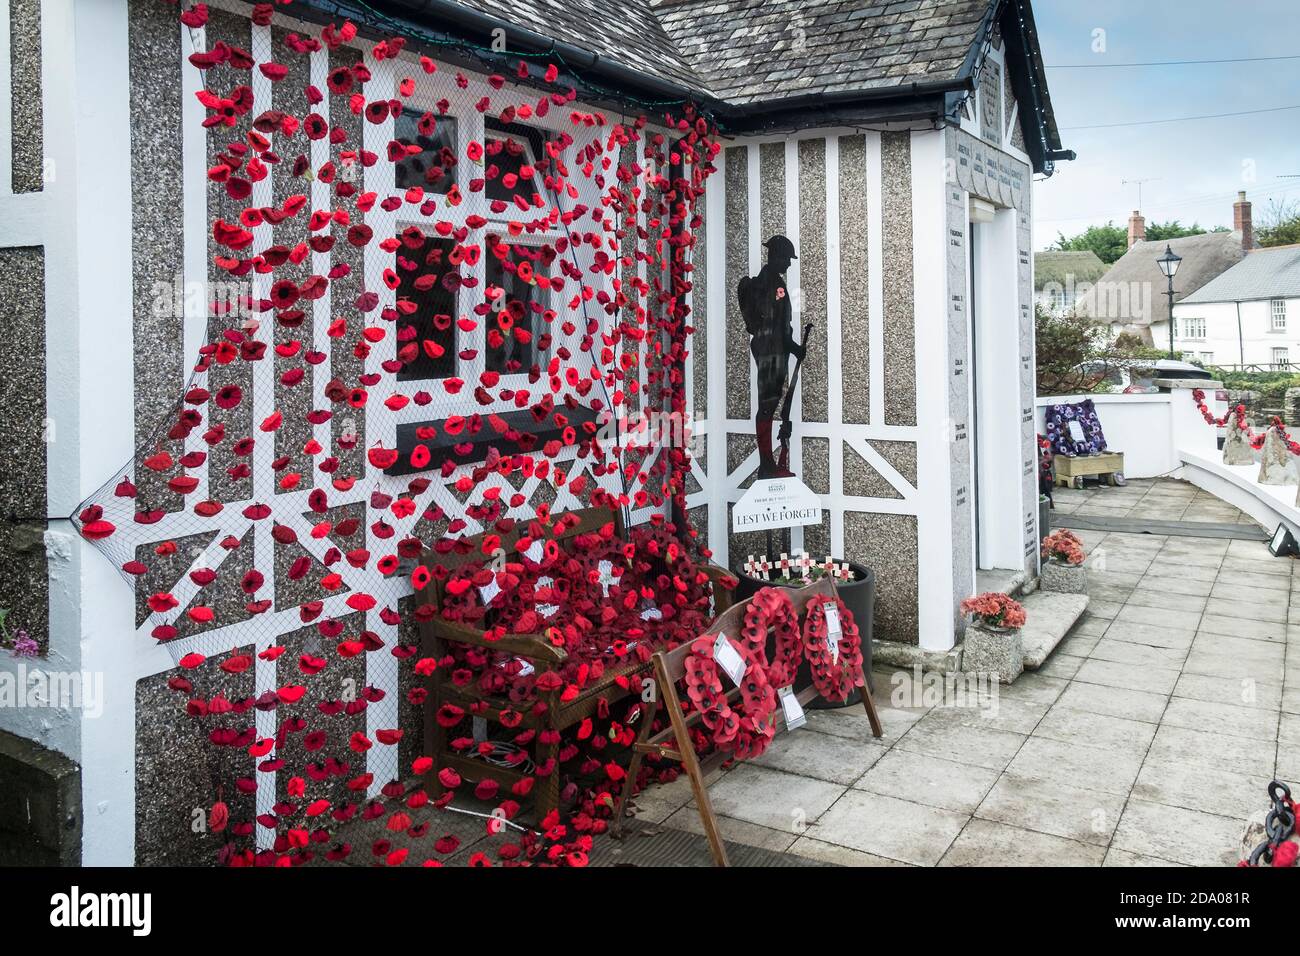 Remembering Together for Remembrance.  A display by Crantock WI and Arty/Crafty Group at Crantock Village in Cornwall. Stock Photo